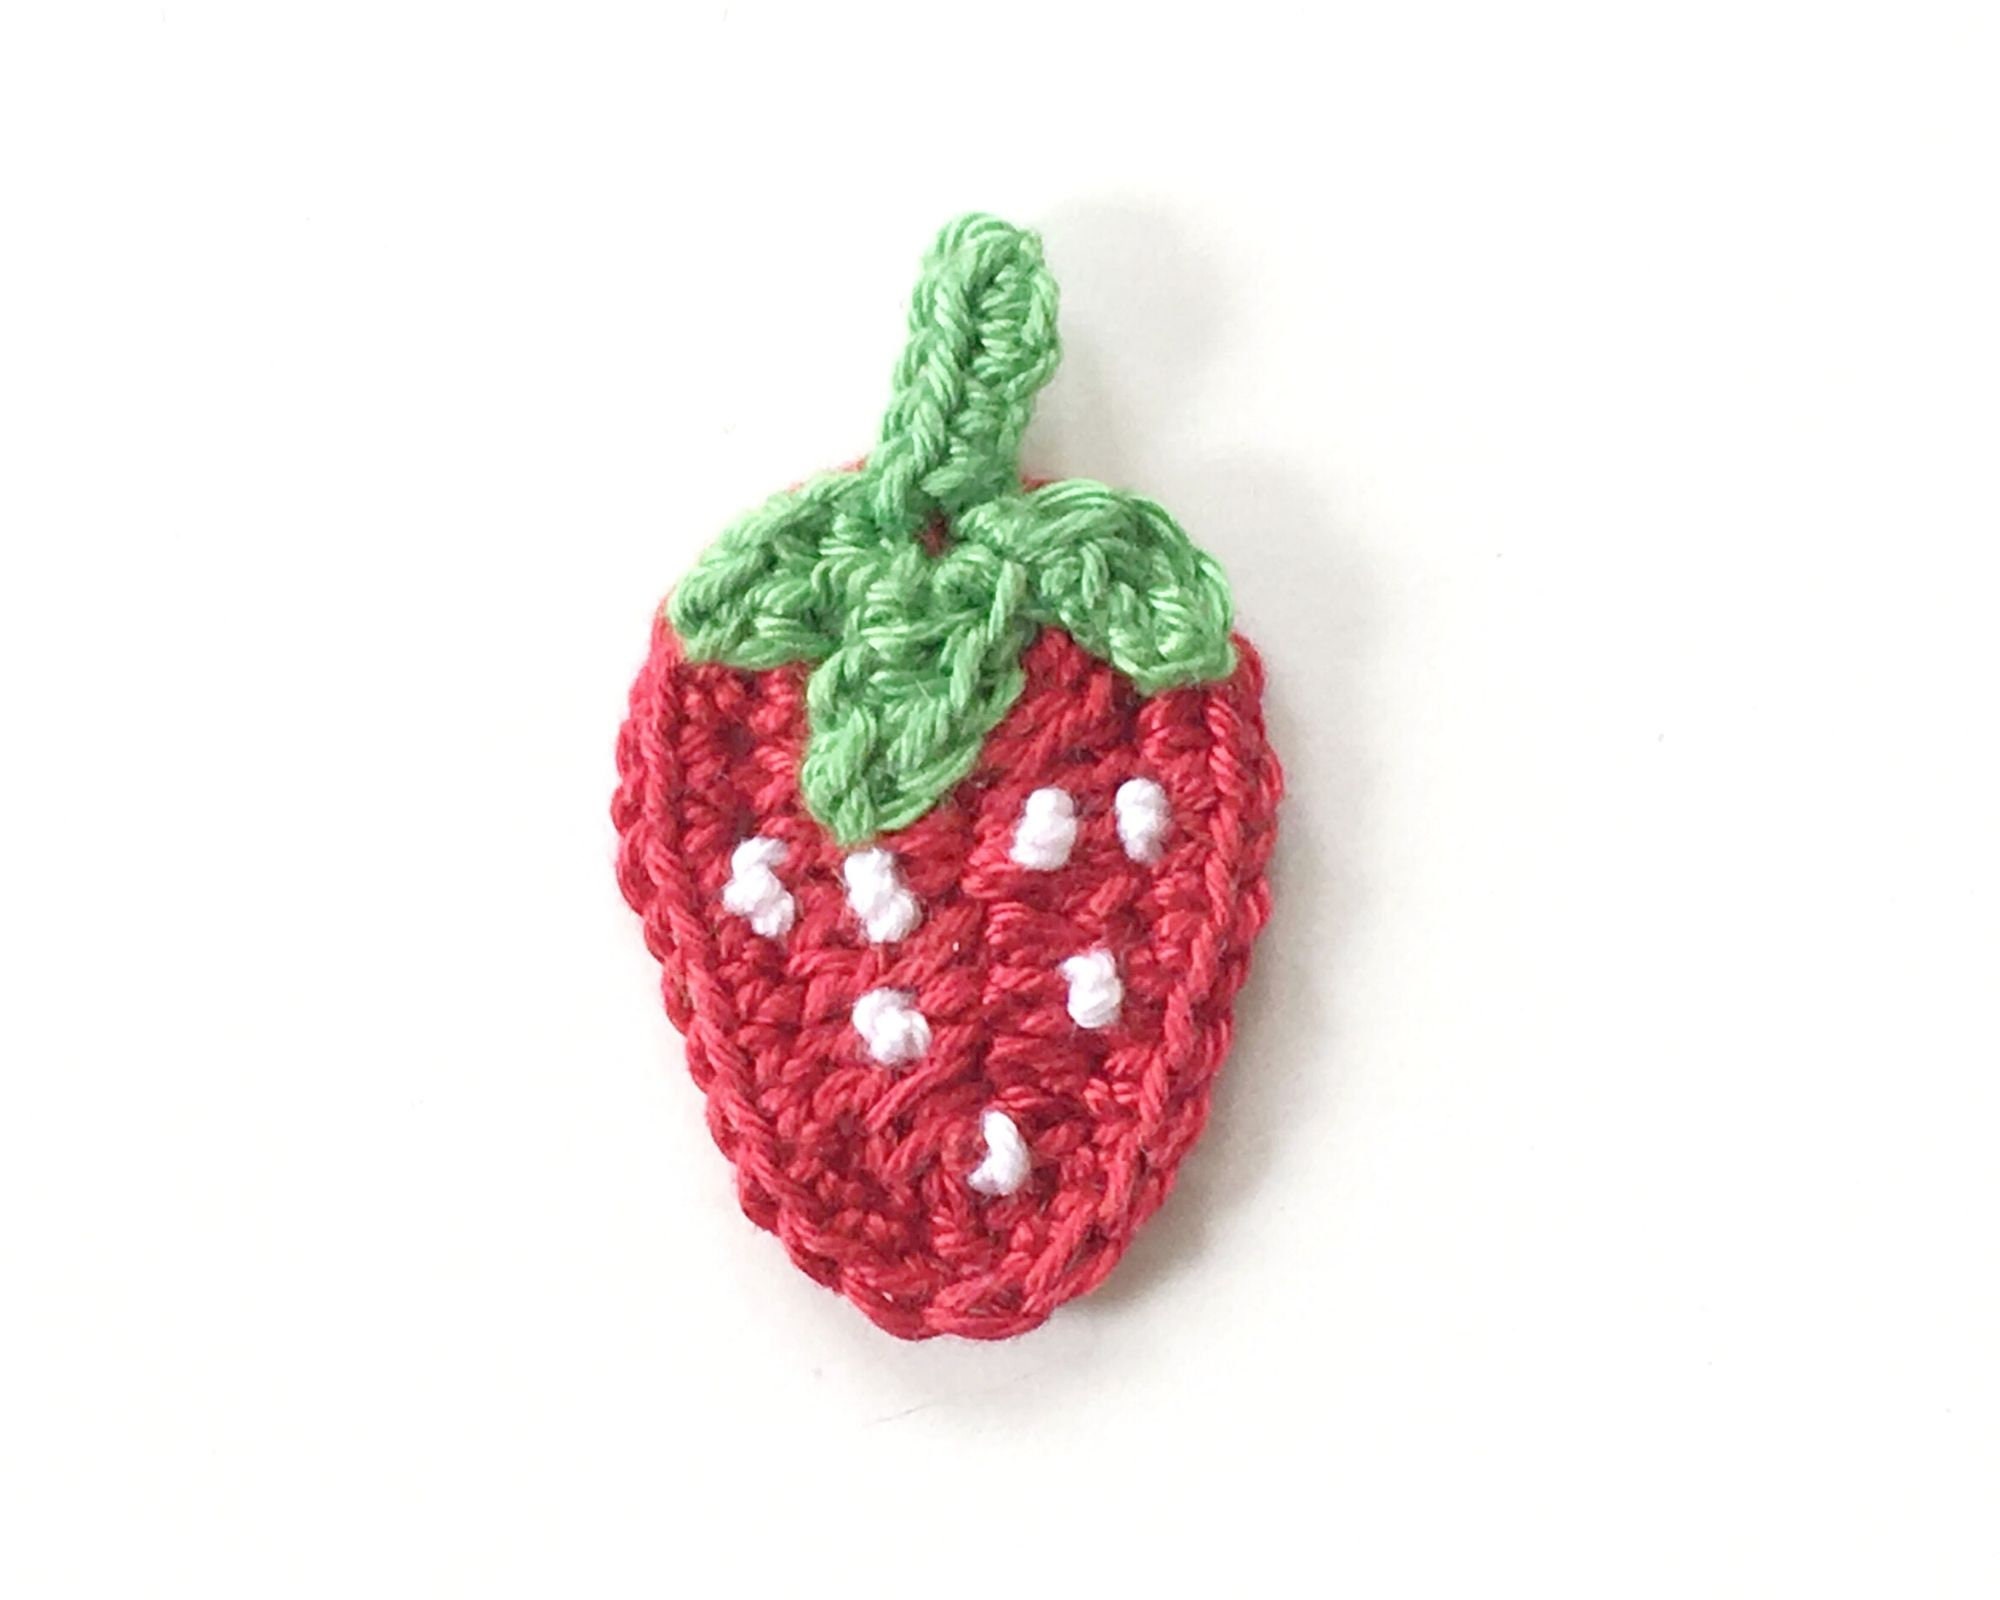 Small Strawberry Fabric Iron on Applique Your Choice From 3 Options 